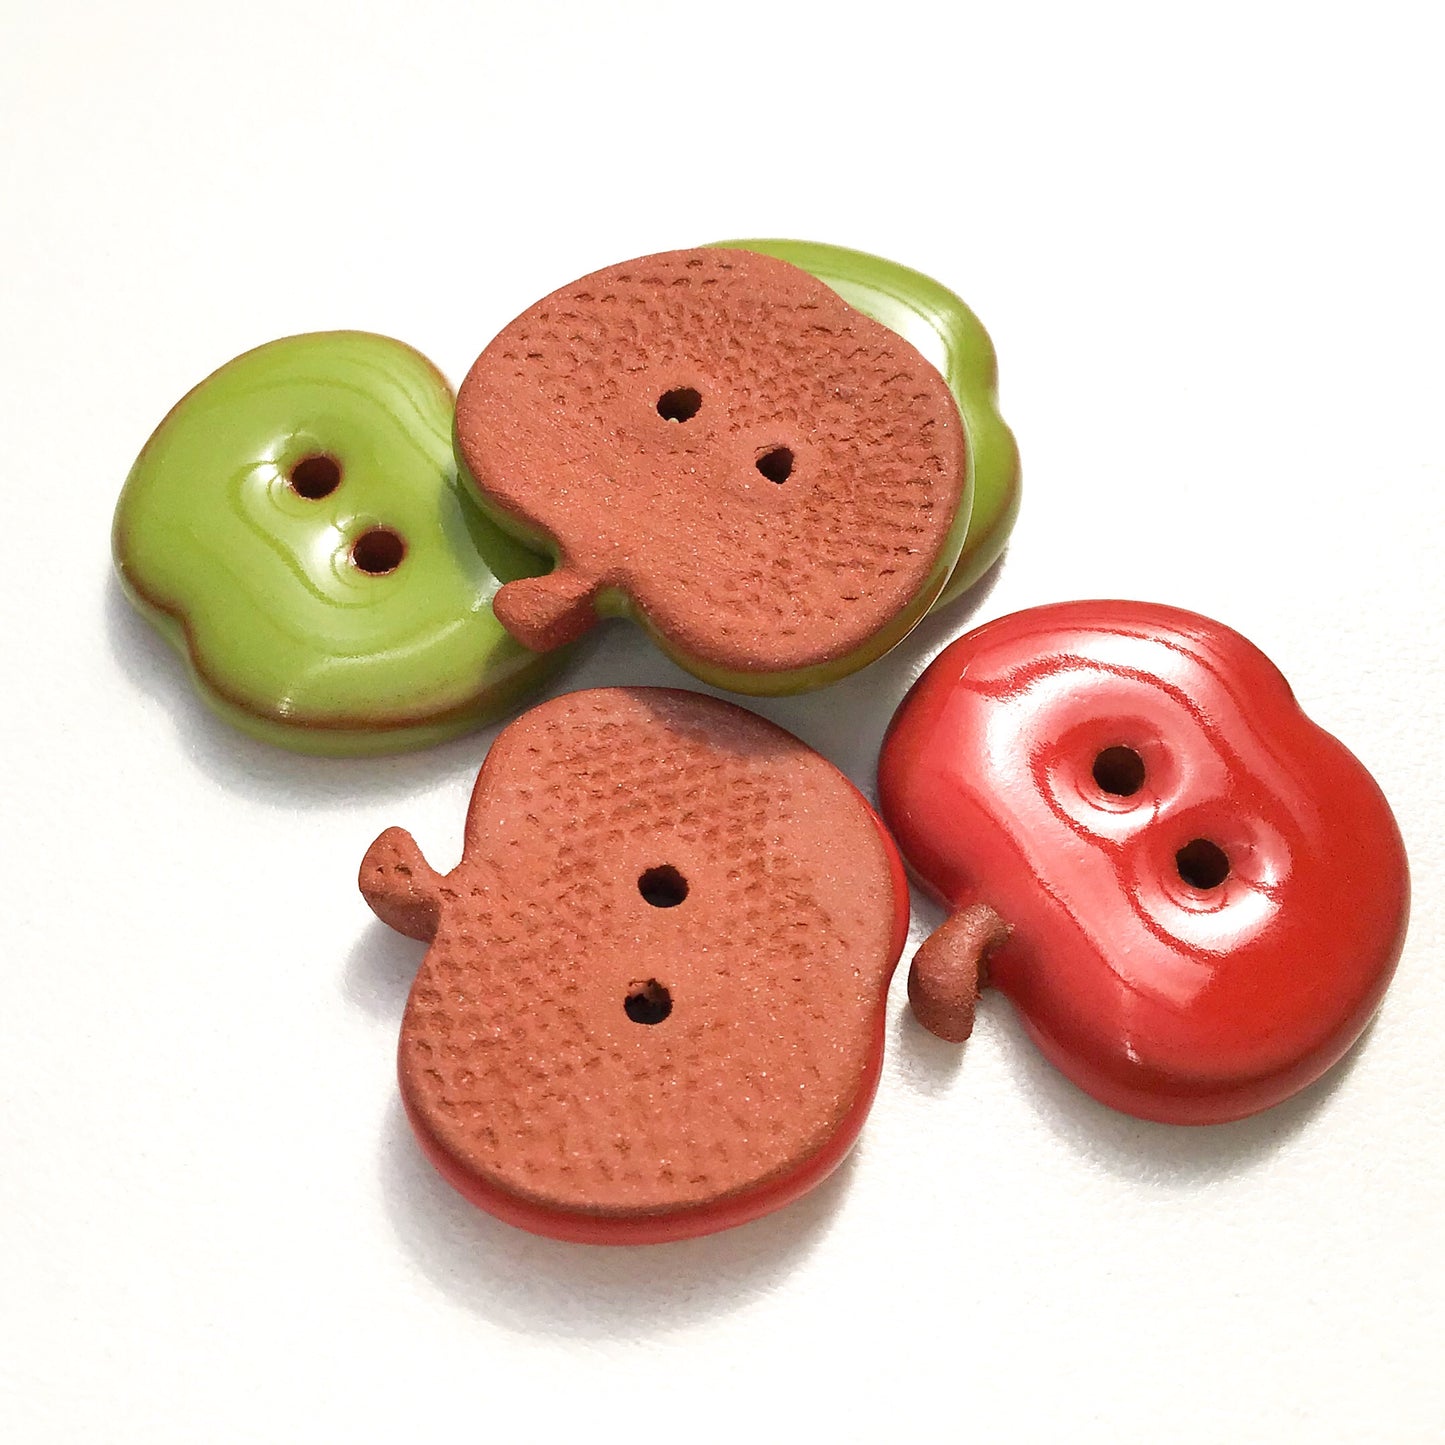 Ceramic Apple Buttons: Red and Green Ceramic Buttons - Clay Apple Buttons